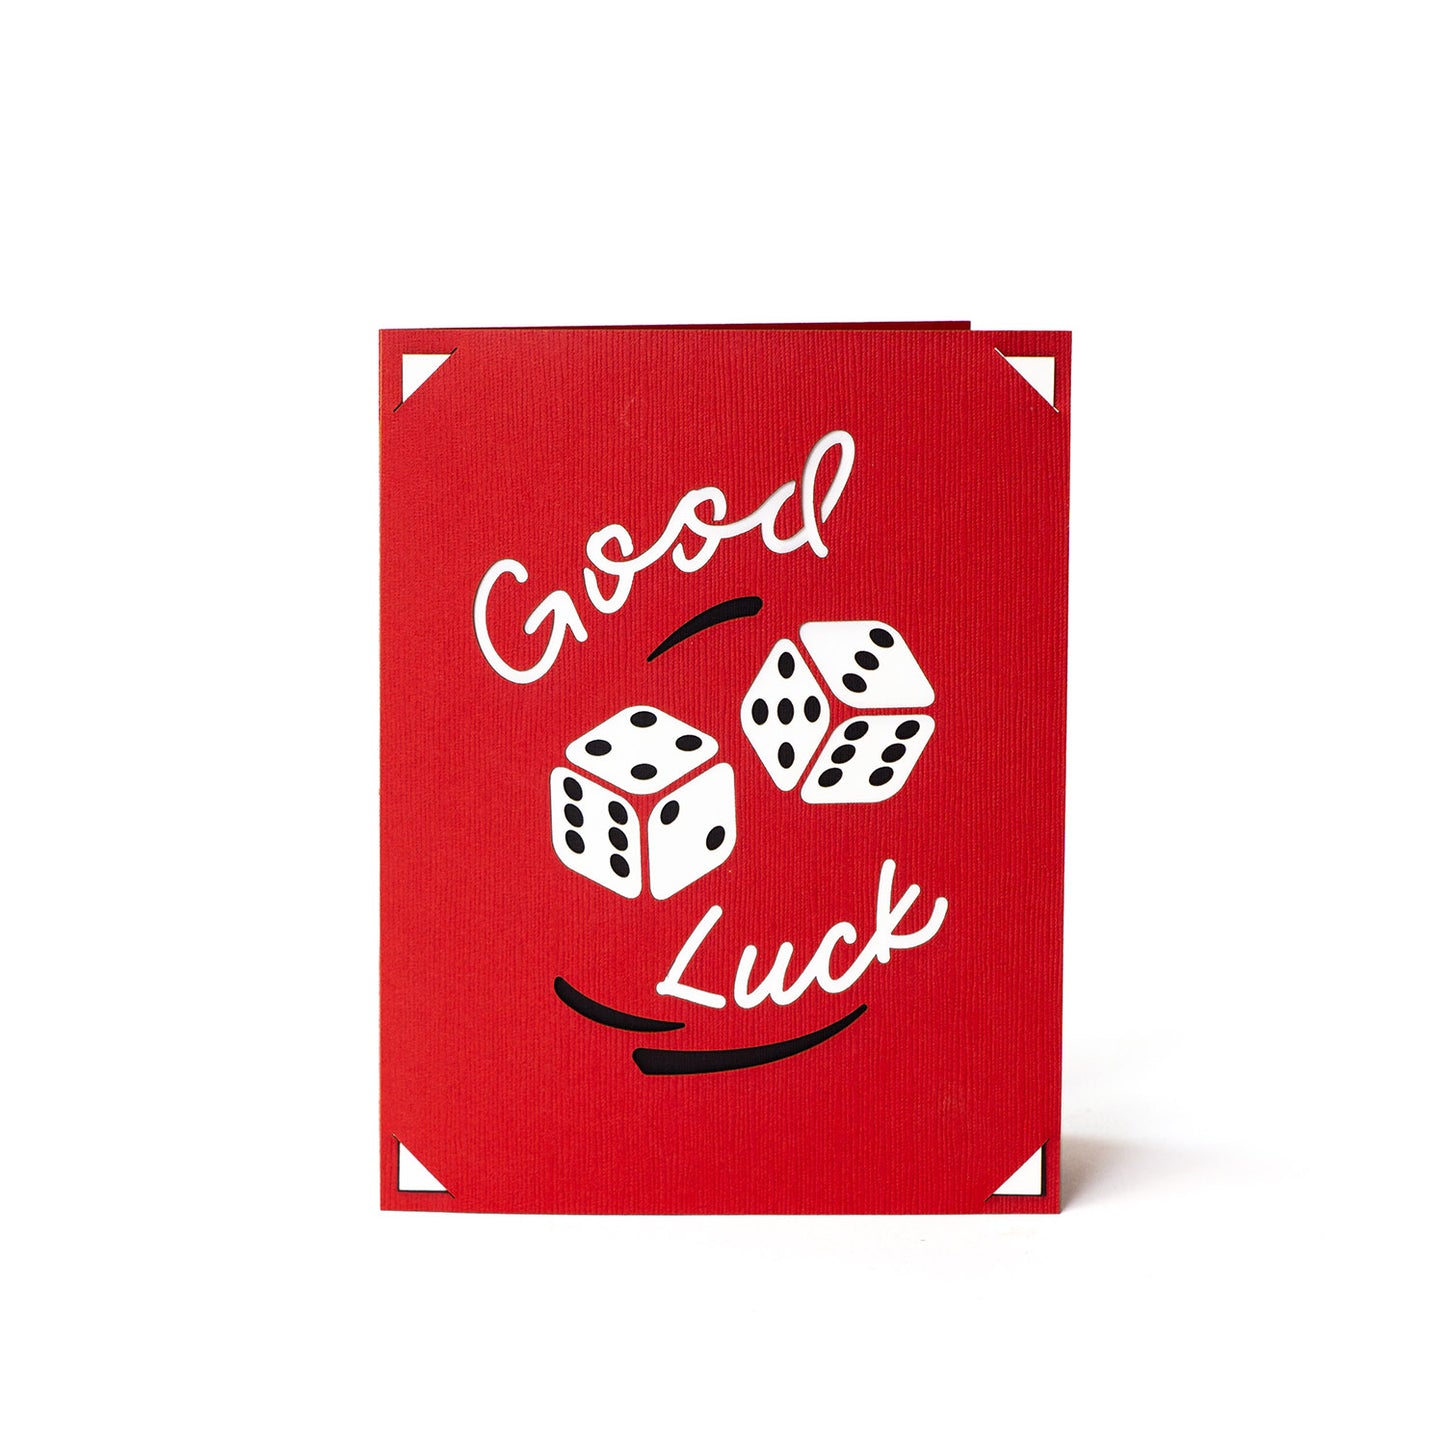 Rolling Dice "Good Luck" Greeting Card